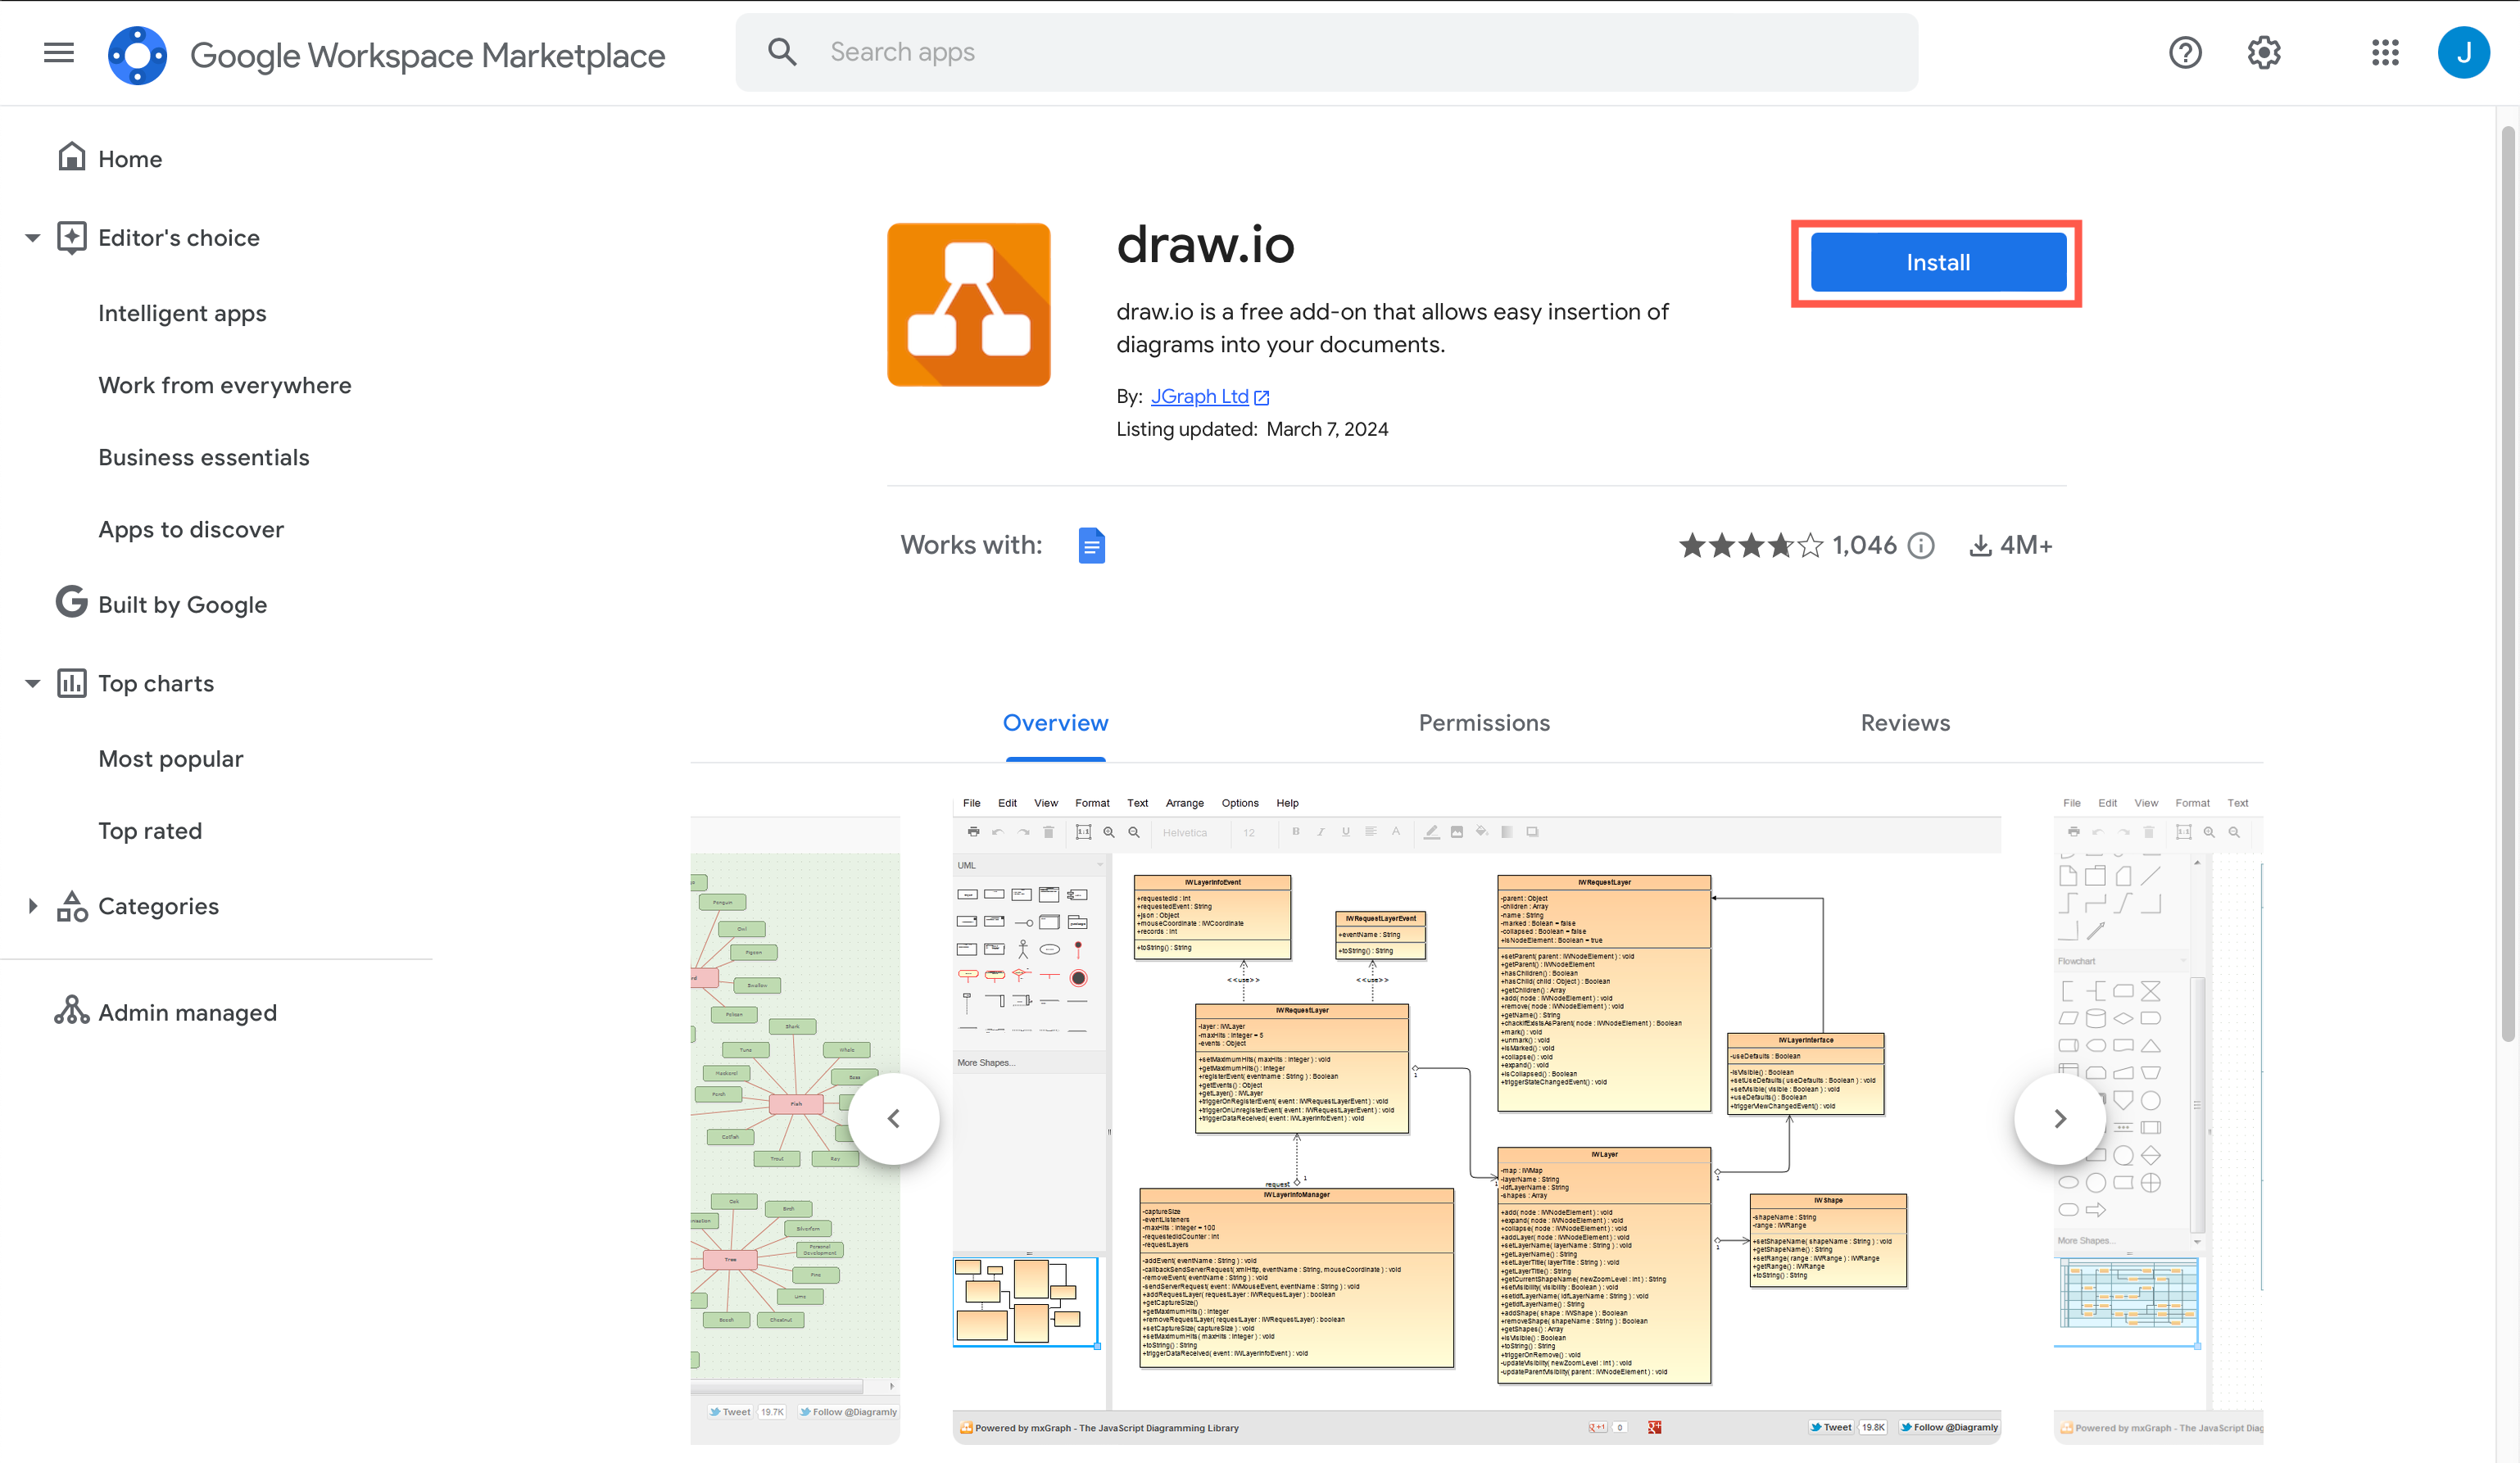 Install the draw.io for Docs add-on from the Google Marketplace